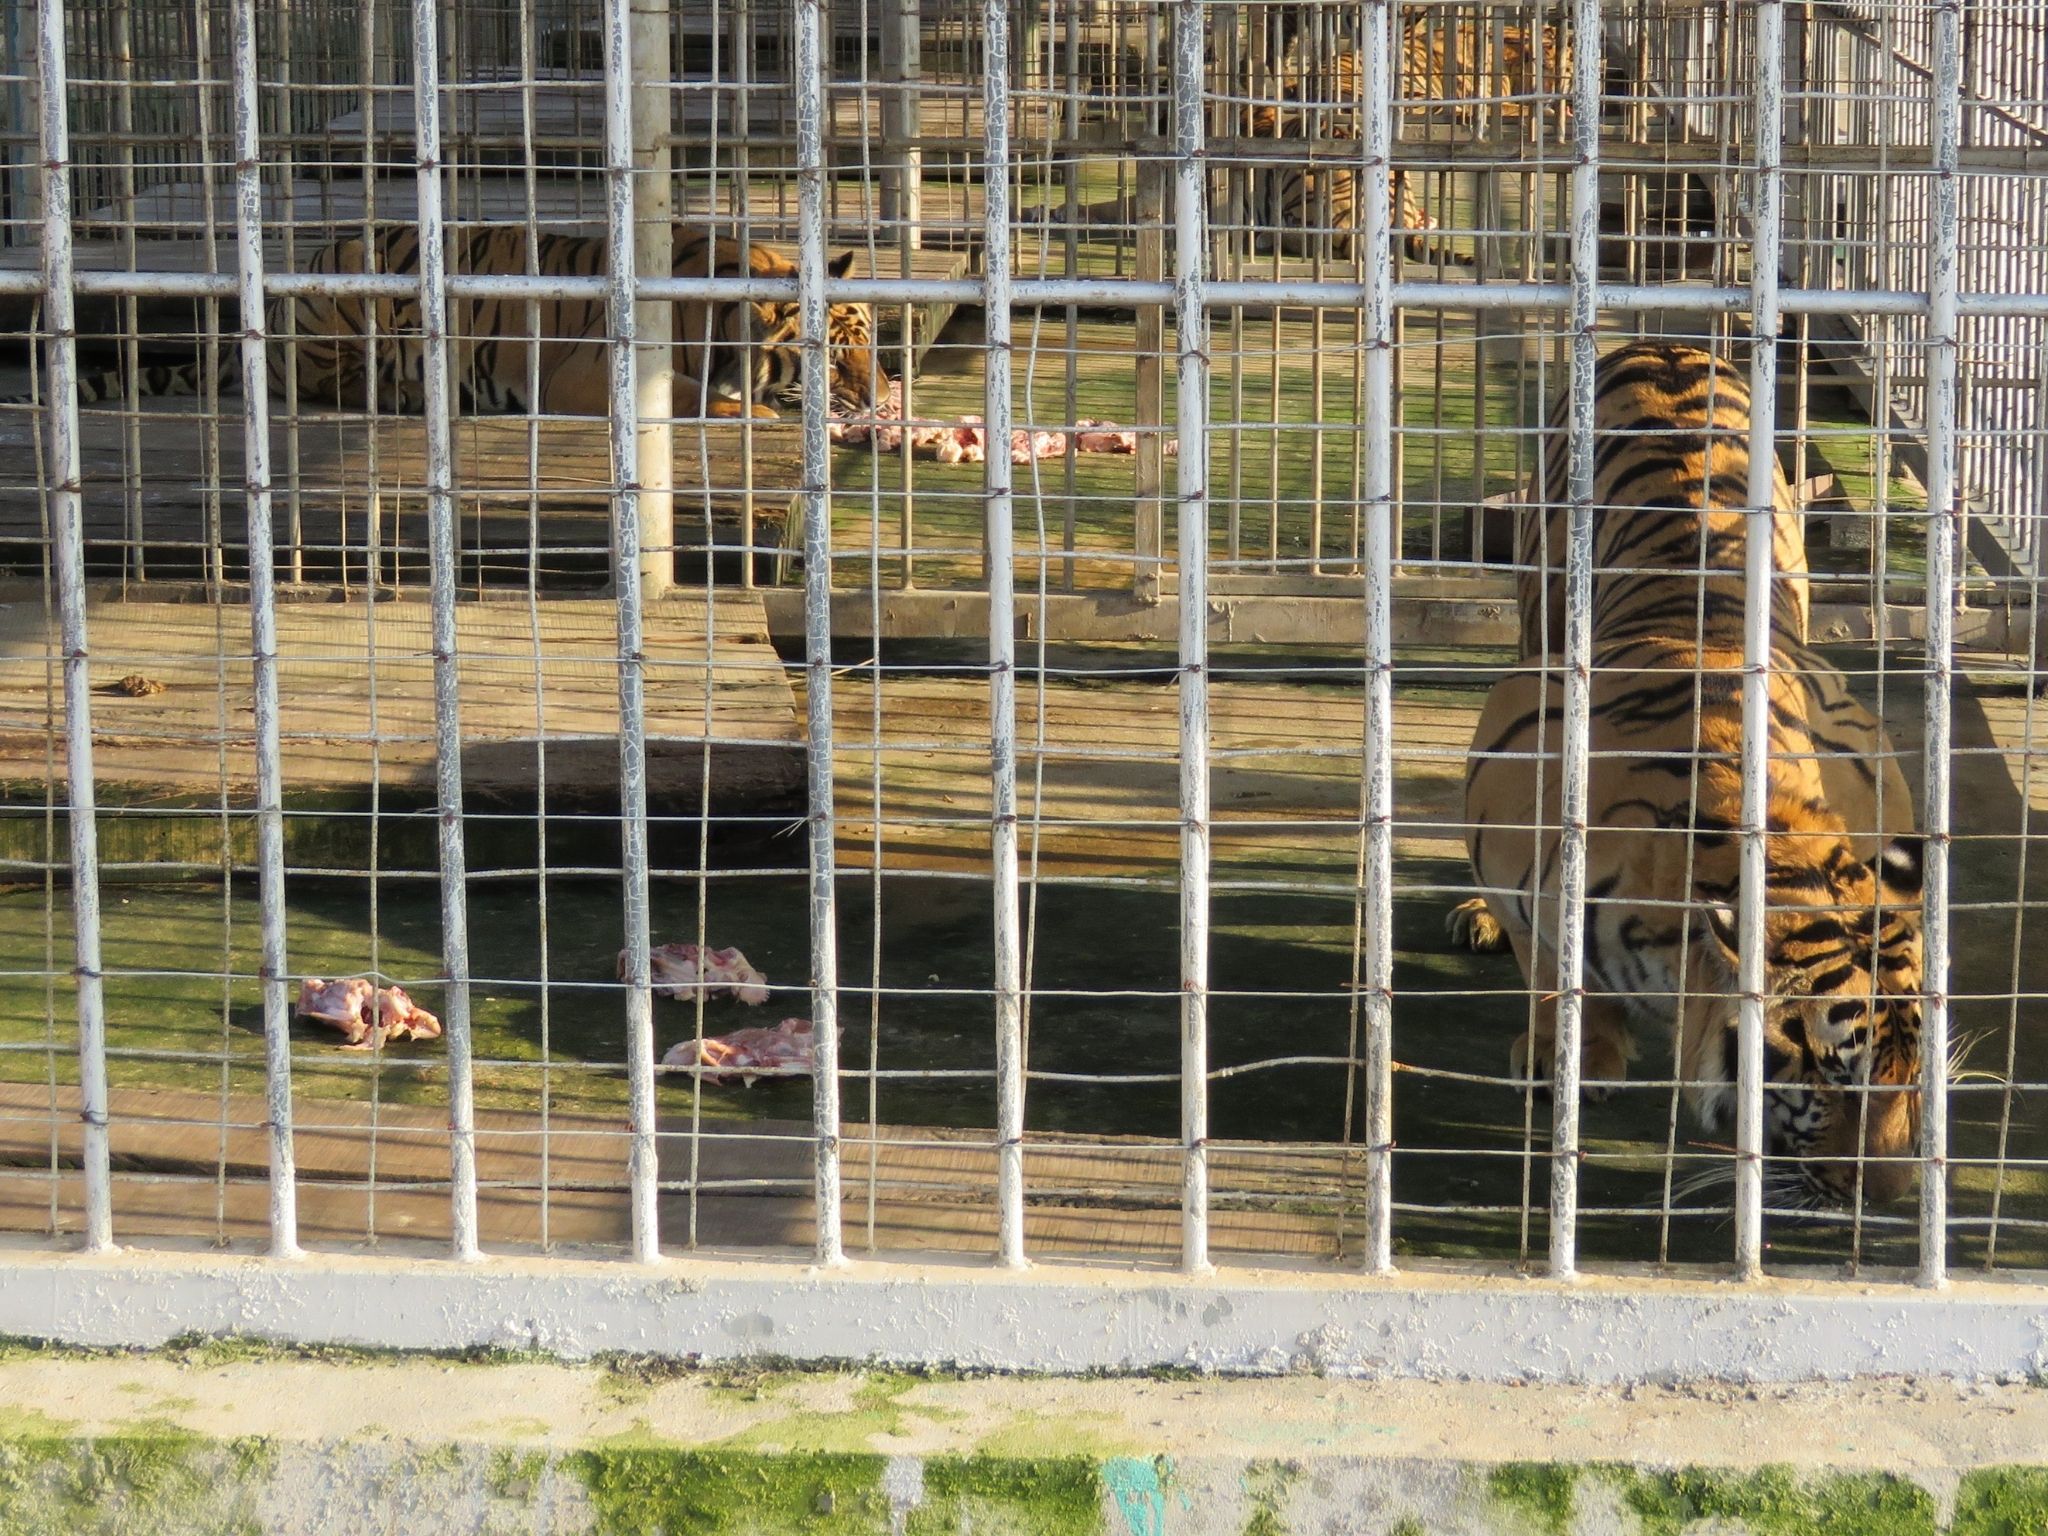 Tiger cages in Laos